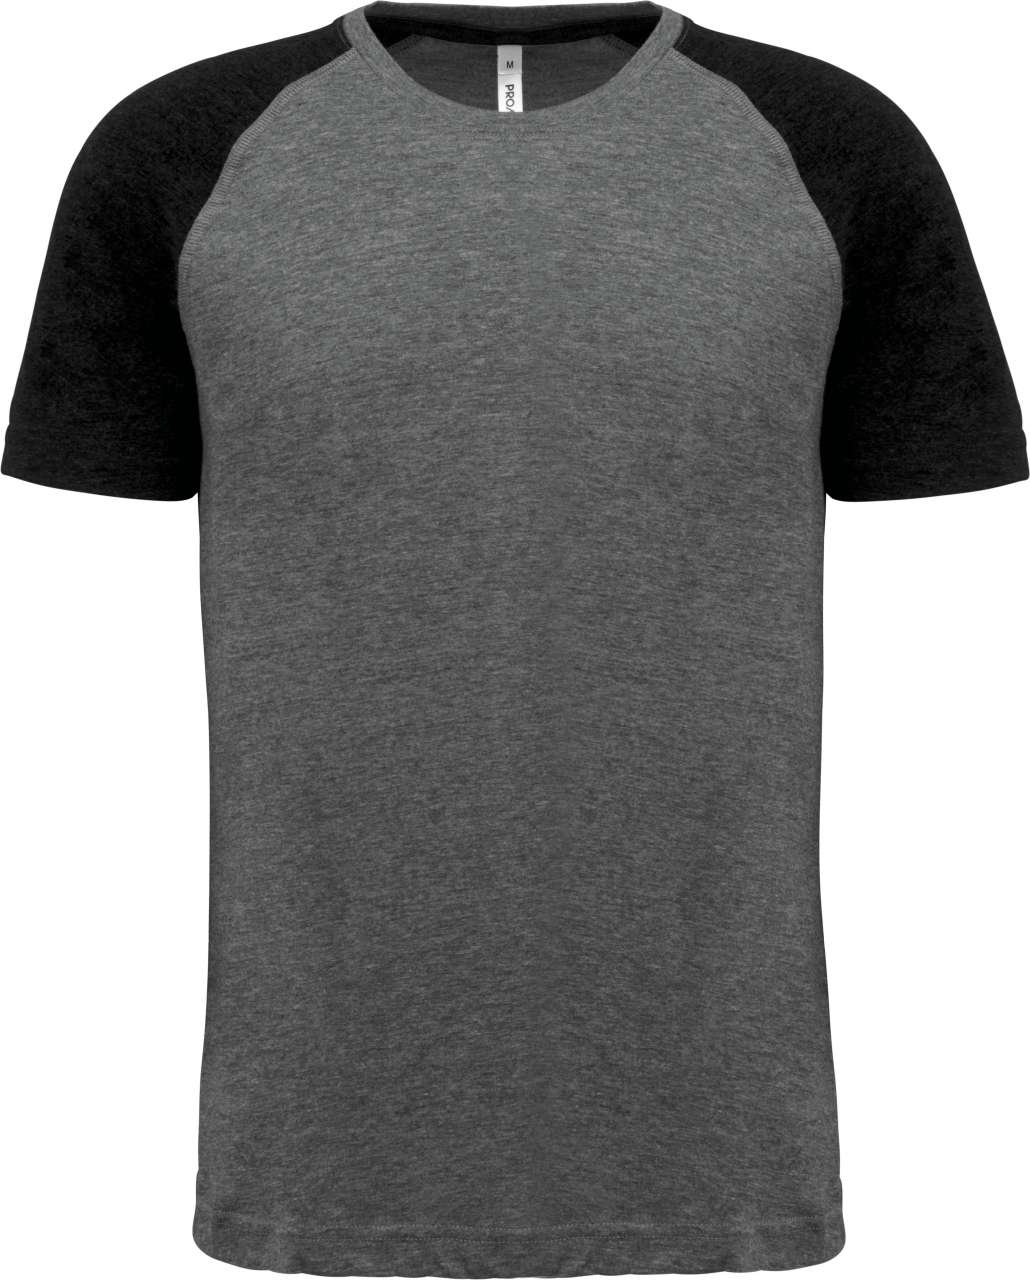 Promo  ADULT TRIBLEND TWO-TONE SPORTS SHORT-SLEEVED T-SHIRT